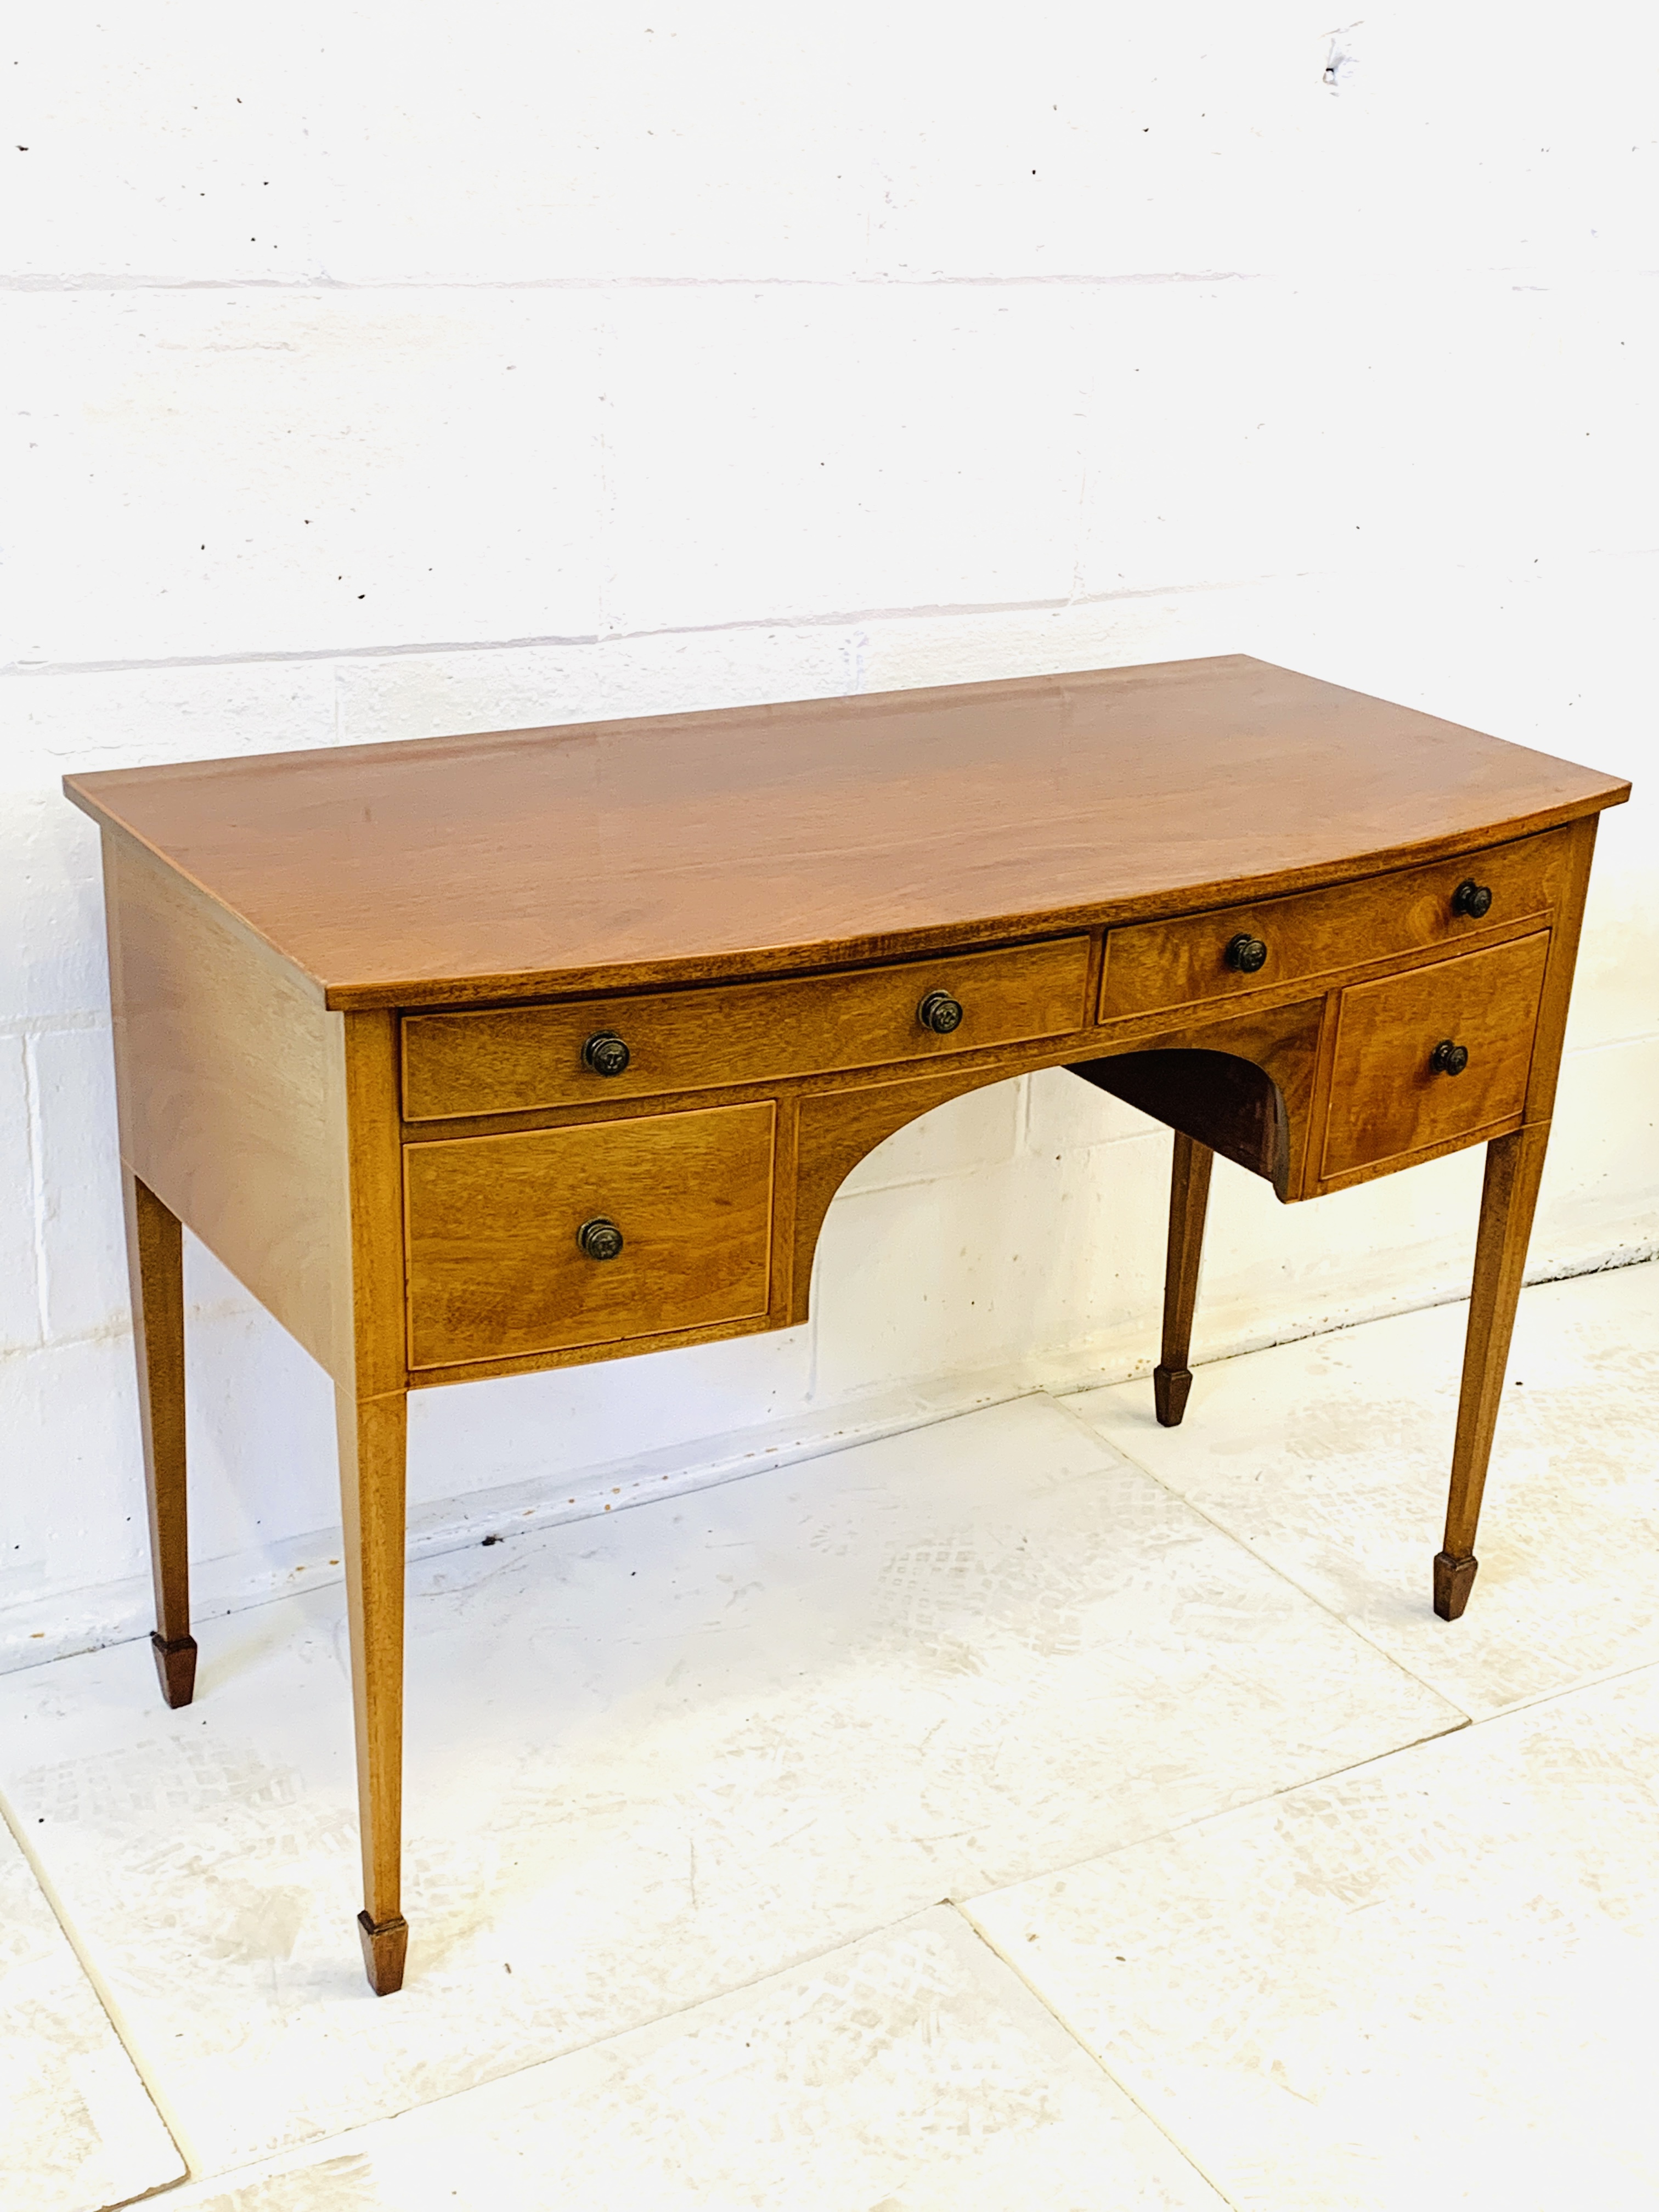 Mahogany bow fronted desk - Image 3 of 6